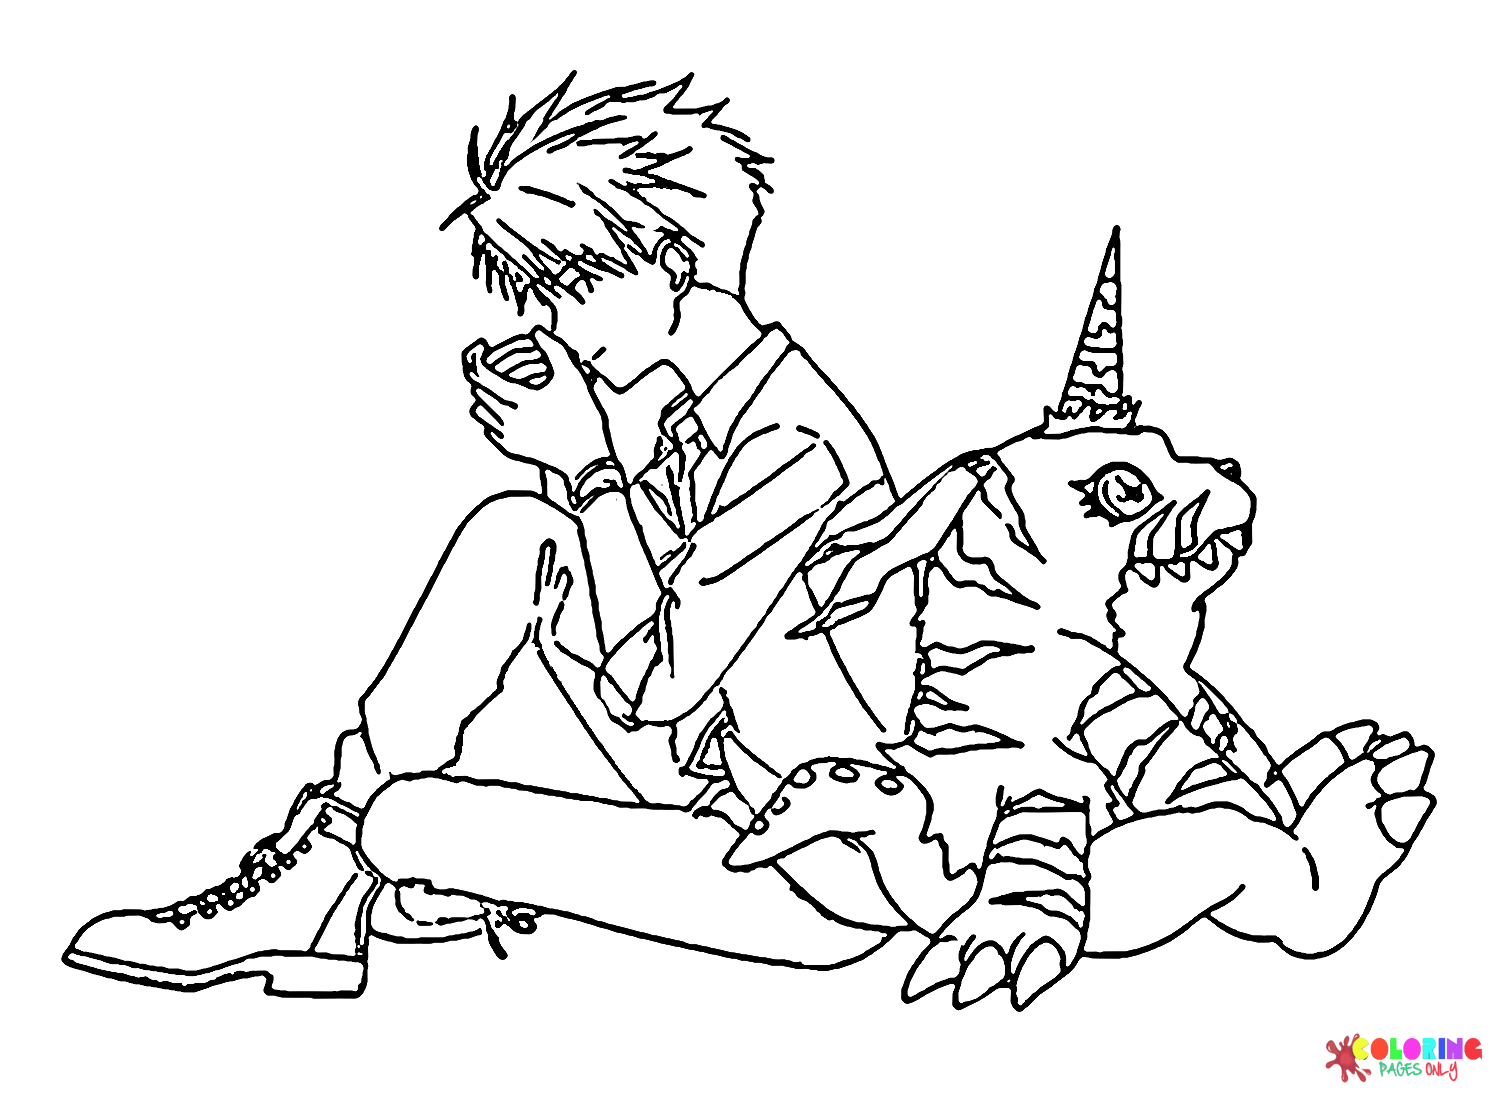 Yamato with Gabumon Coloring Page - Free Printable Coloring Pages